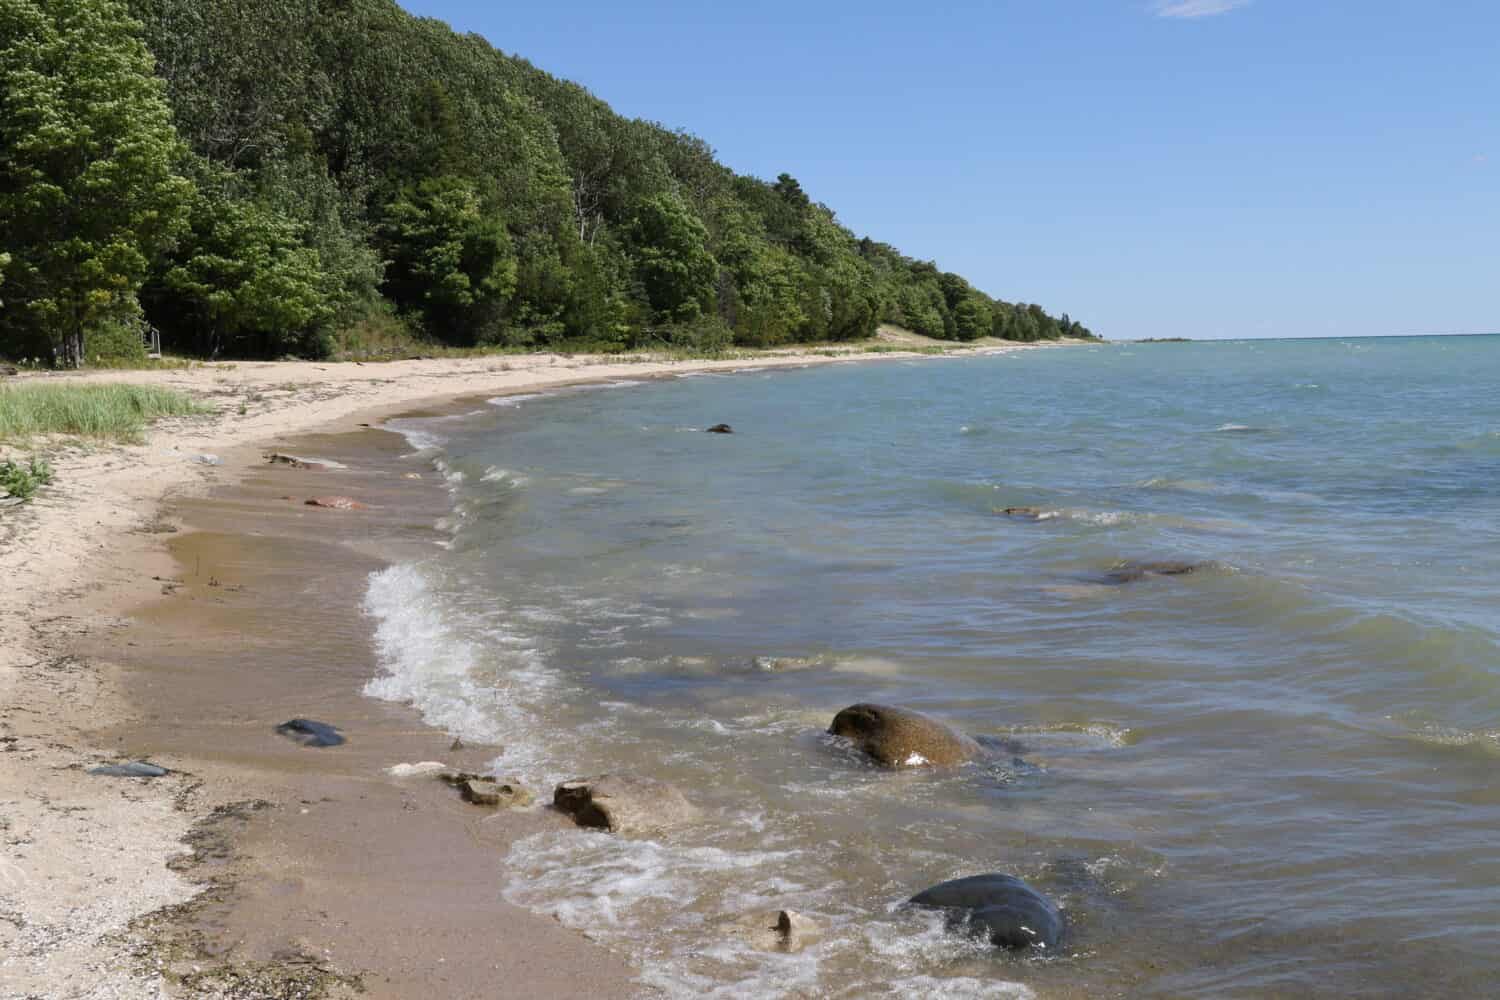 The unspoiled beaches of Beaver Island, in Lake Michigan.